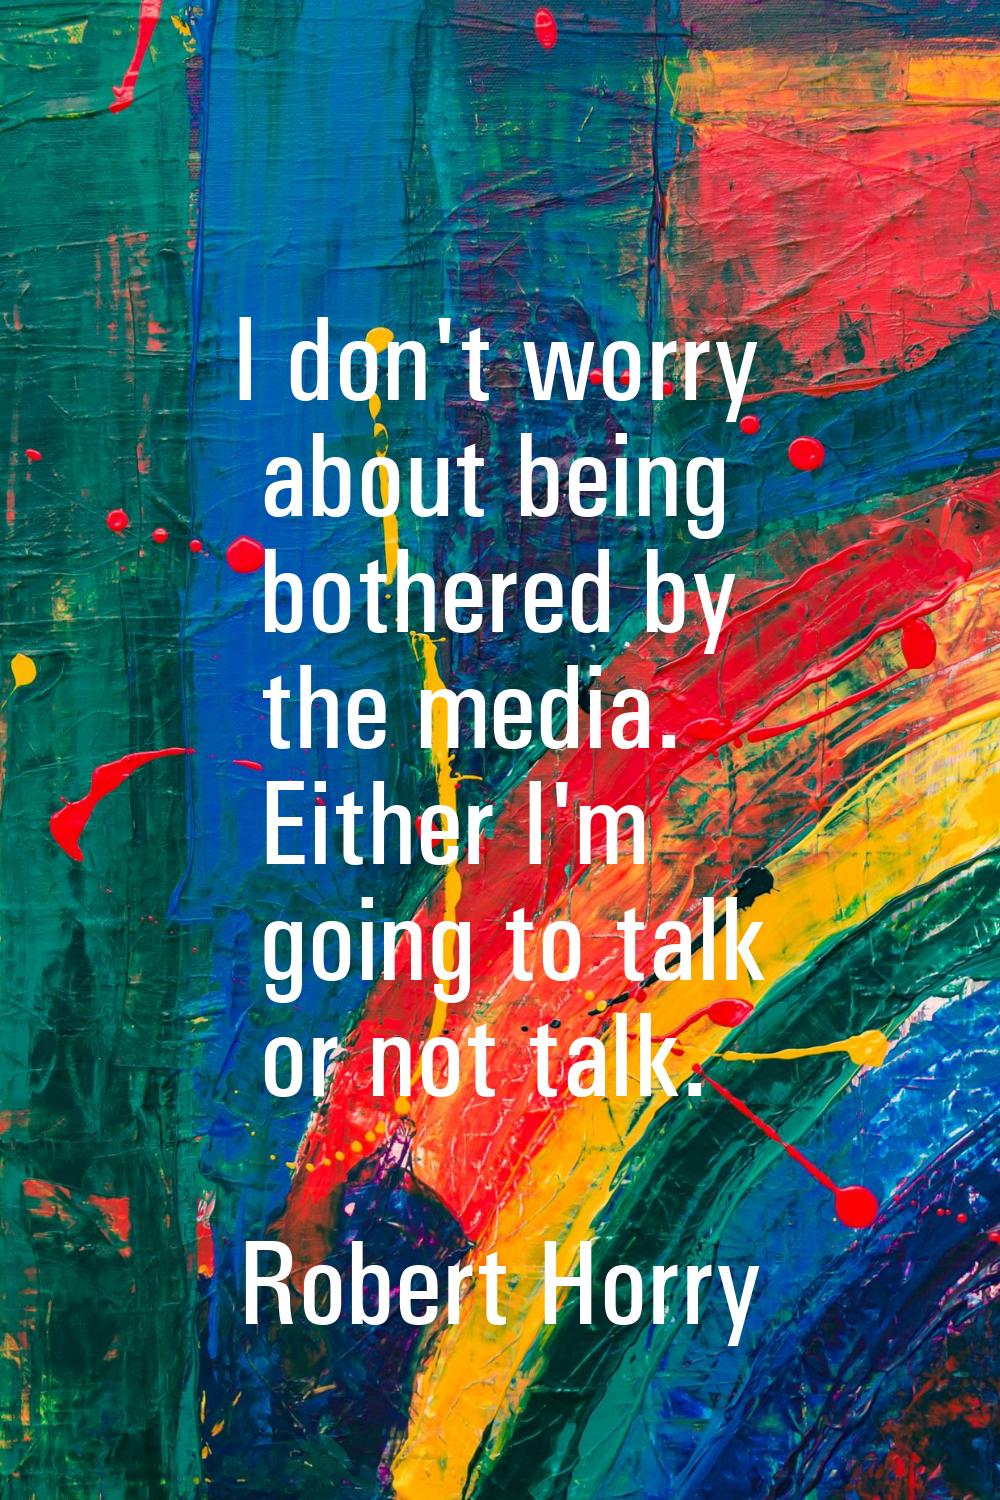 I don't worry about being bothered by the media. Either I'm going to talk or not talk.